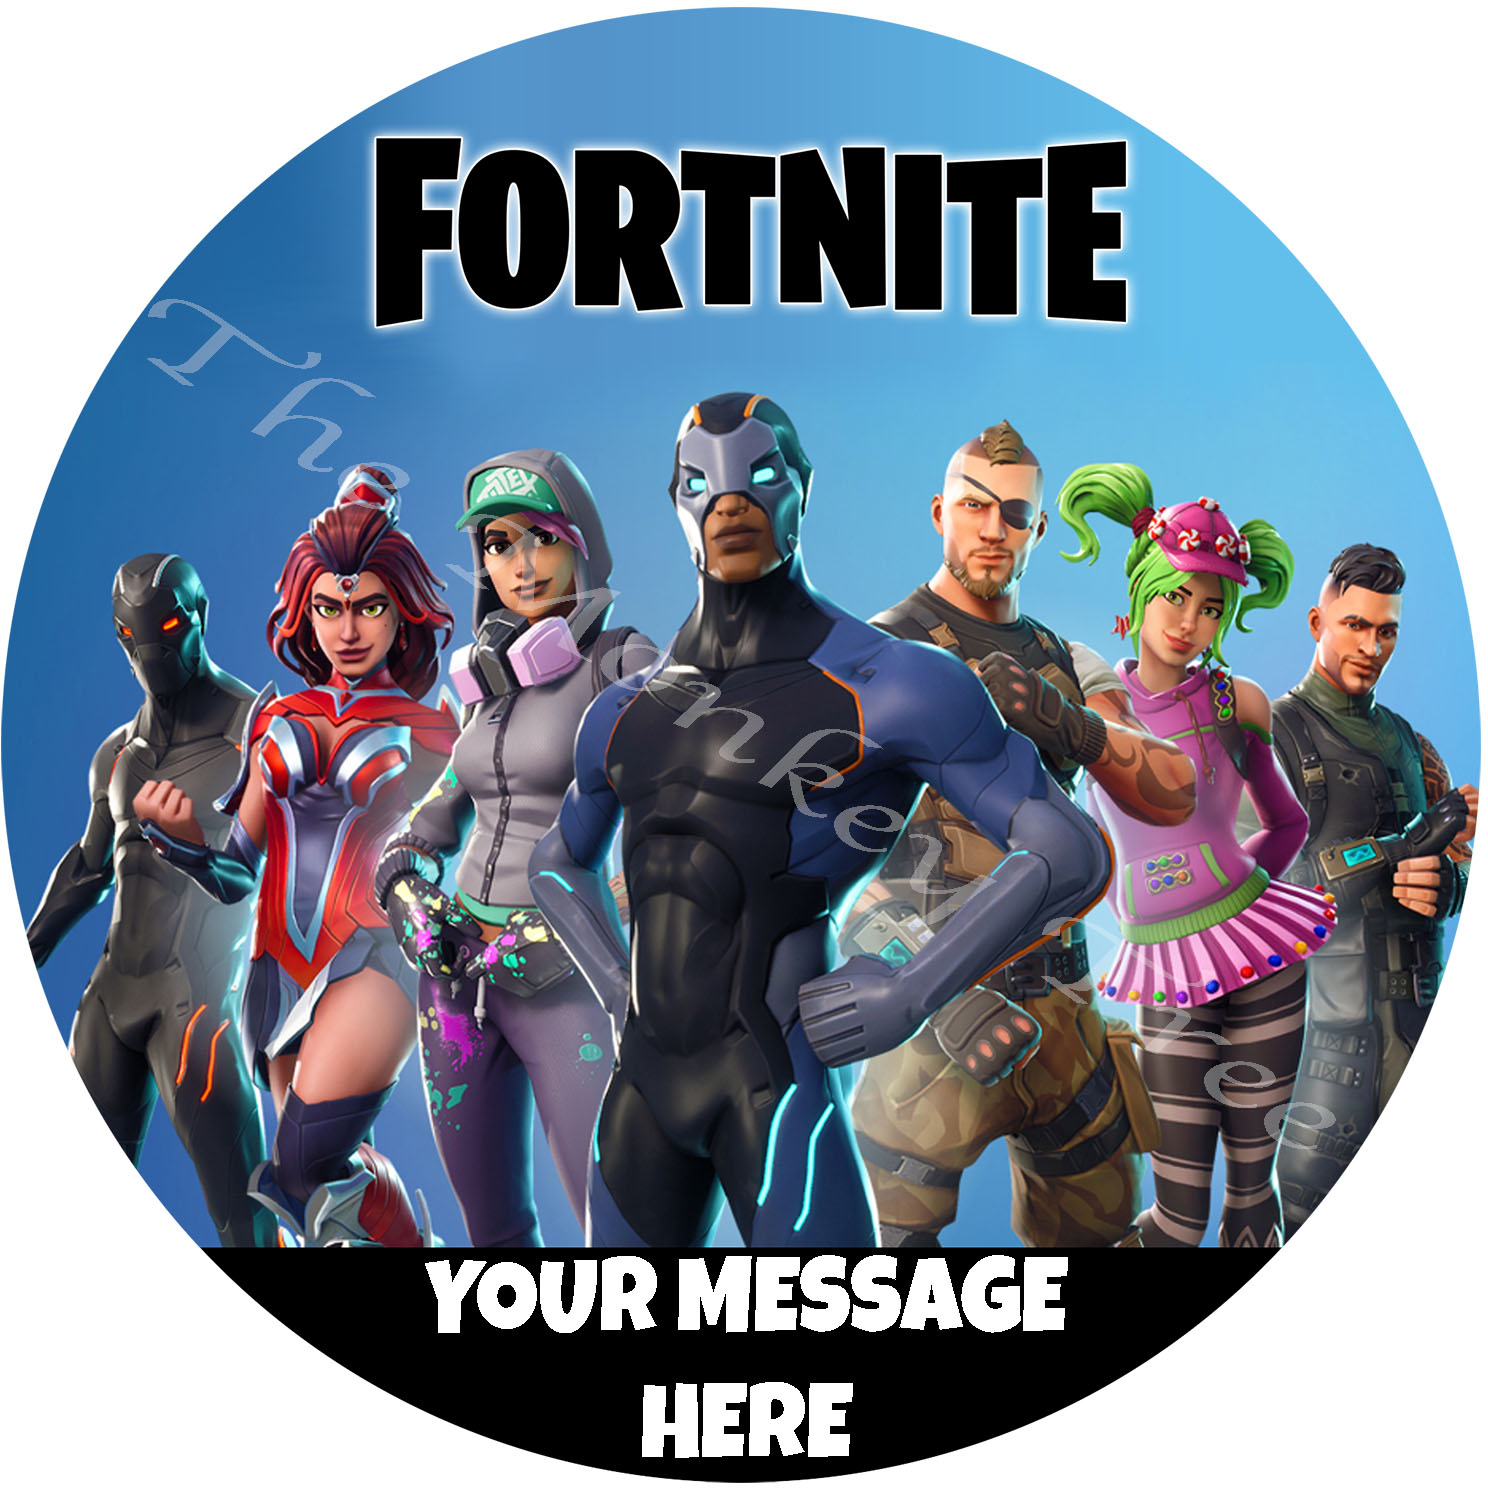 Fortnite Edible Cake Image Topper 3 - can be personalised! - The Monkey ...